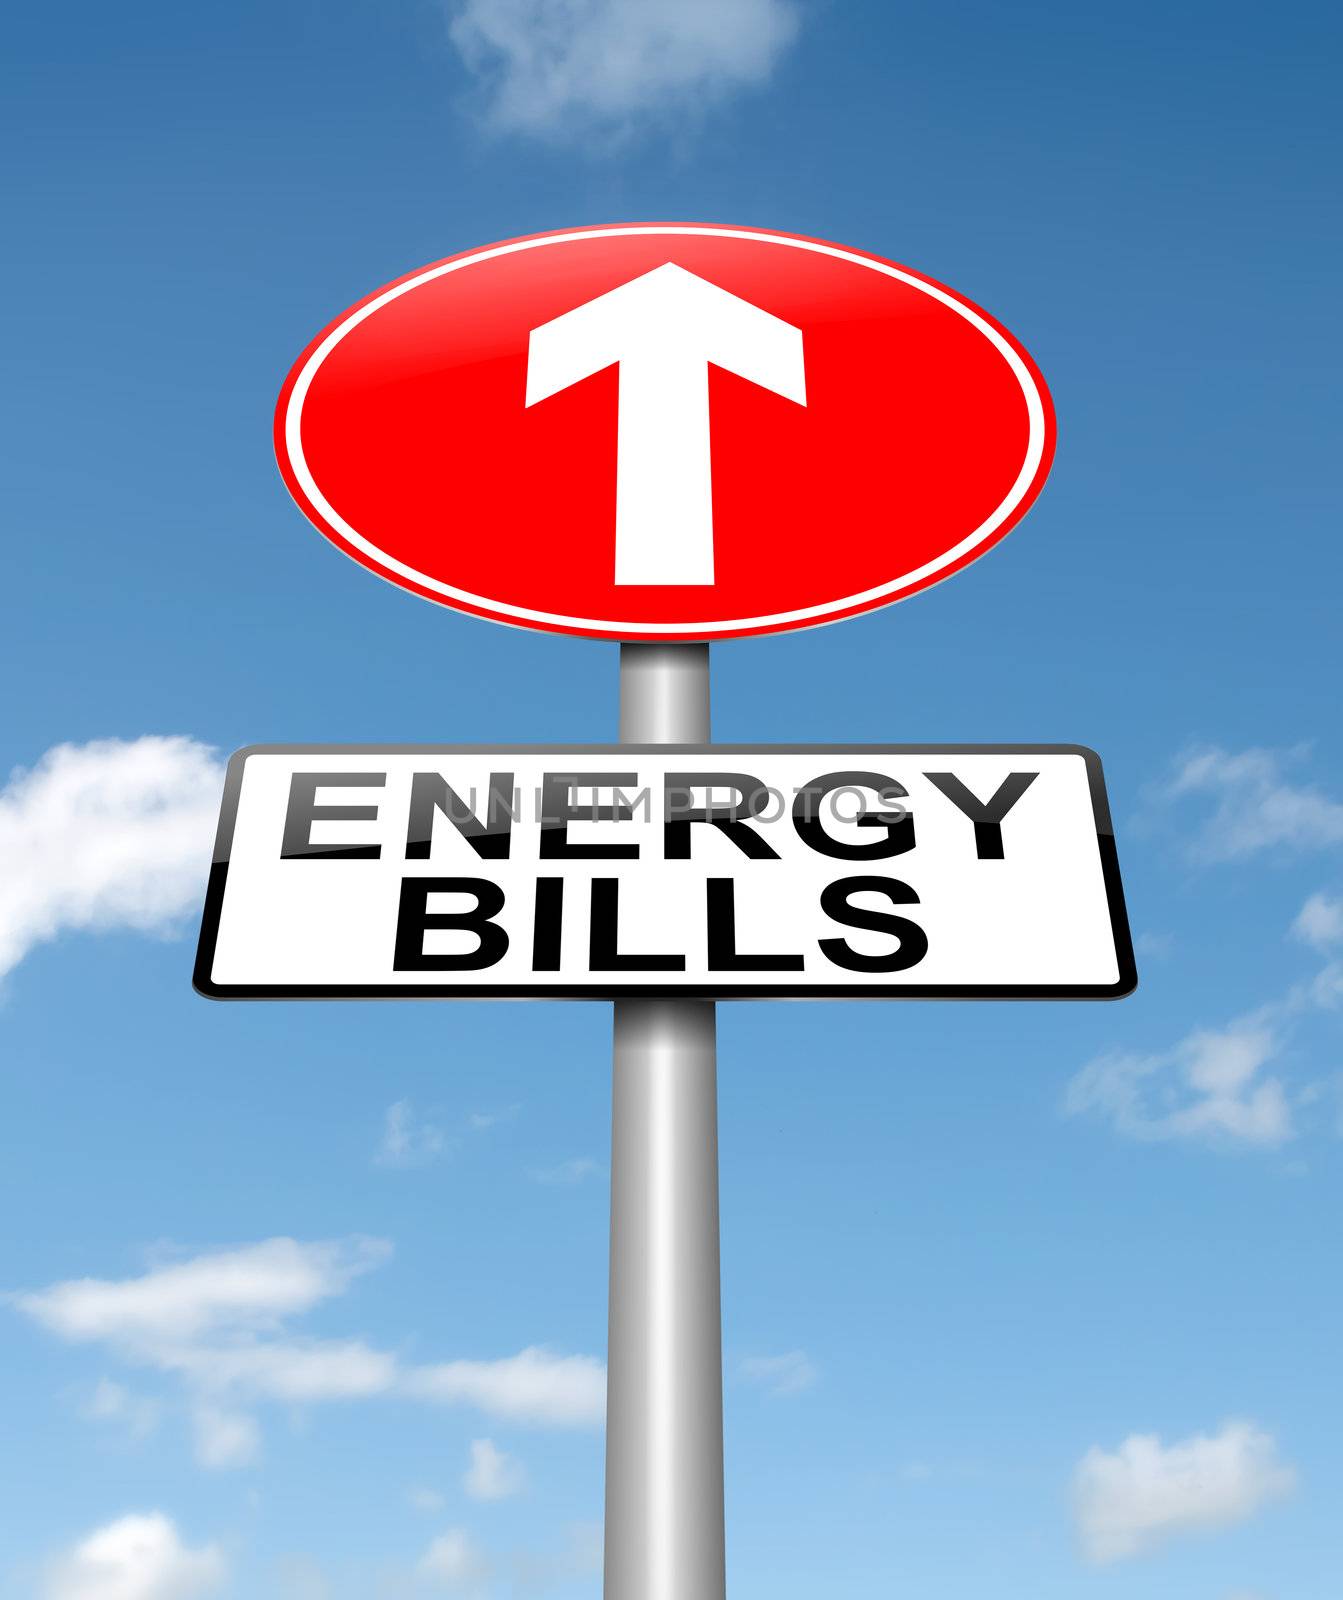 Energy bills concept. by 72soul